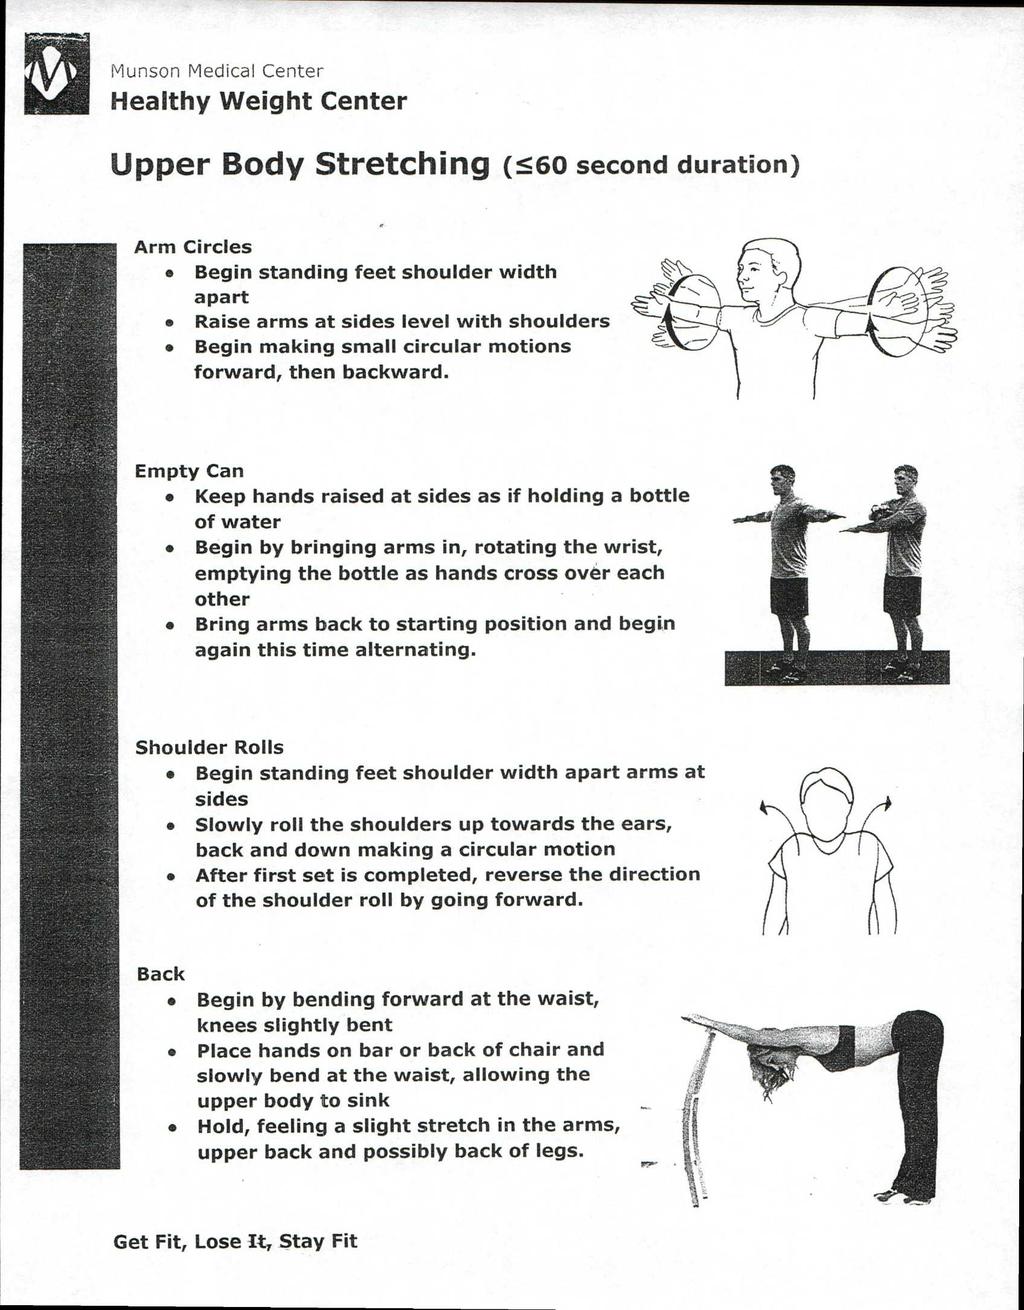 Upper Body Stretching (560 second duration) Arm Circles Begin standing feet shoulder width apart Raise arms at sides level with shoulders Begin making small circular motions forward, then backward.